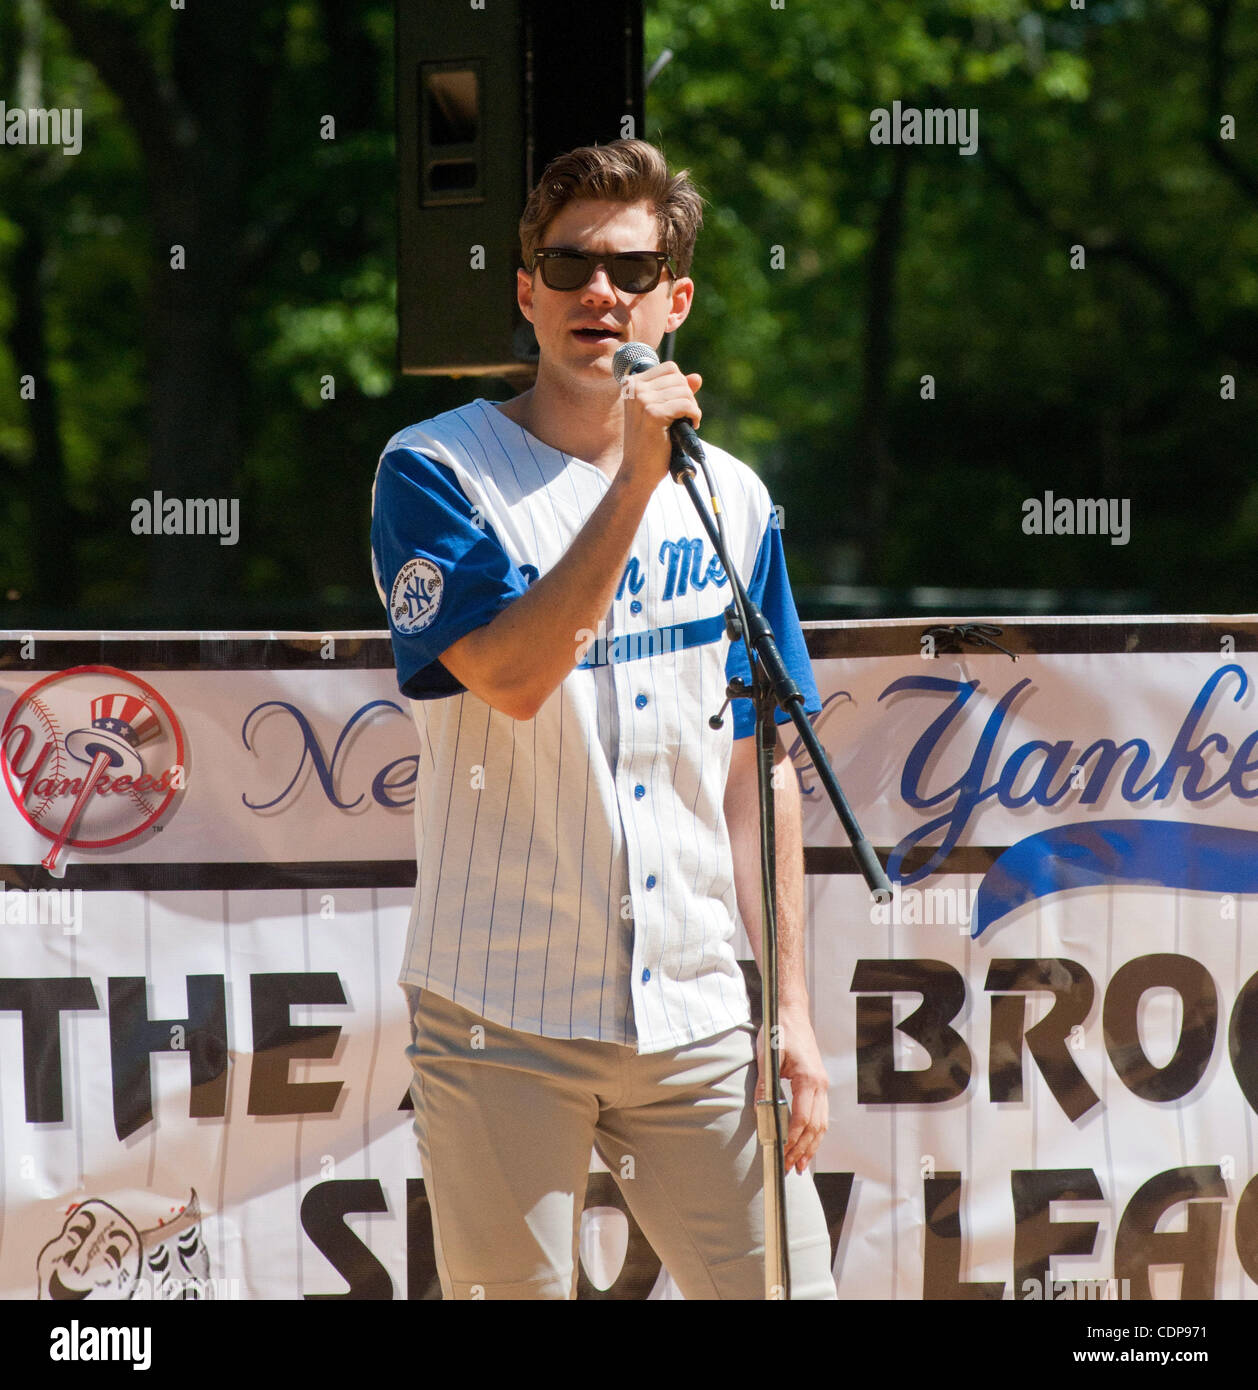 May 12, 2011 - New York City, New York, U.S. - AARON TVEIT (Catch Me If You Can) sings the National Anthem on opening day. The Broadway Show League kicks off its 57th softball season in Central Park on the Hecksher Ballfields. (Credit Image: &#169; Brooke Ismach/ZUMAPRESS.com) Stock Photo